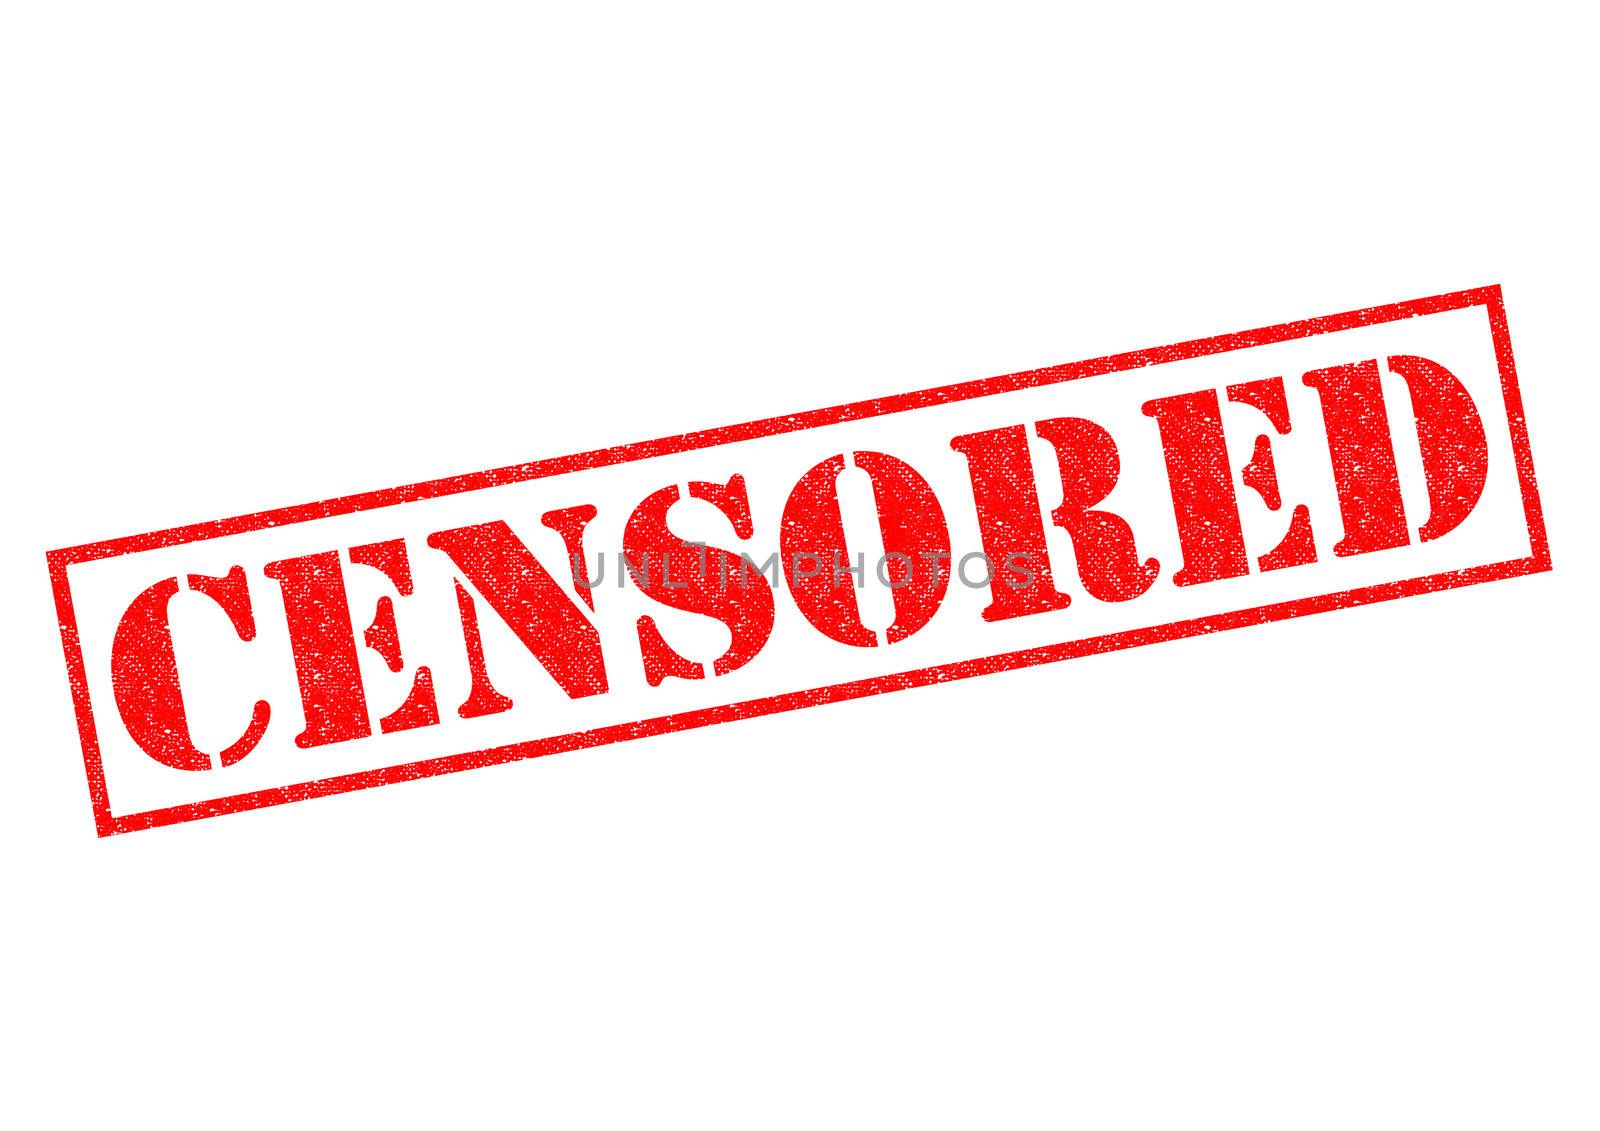 CENSORED red Rubber Stamp over a white background.